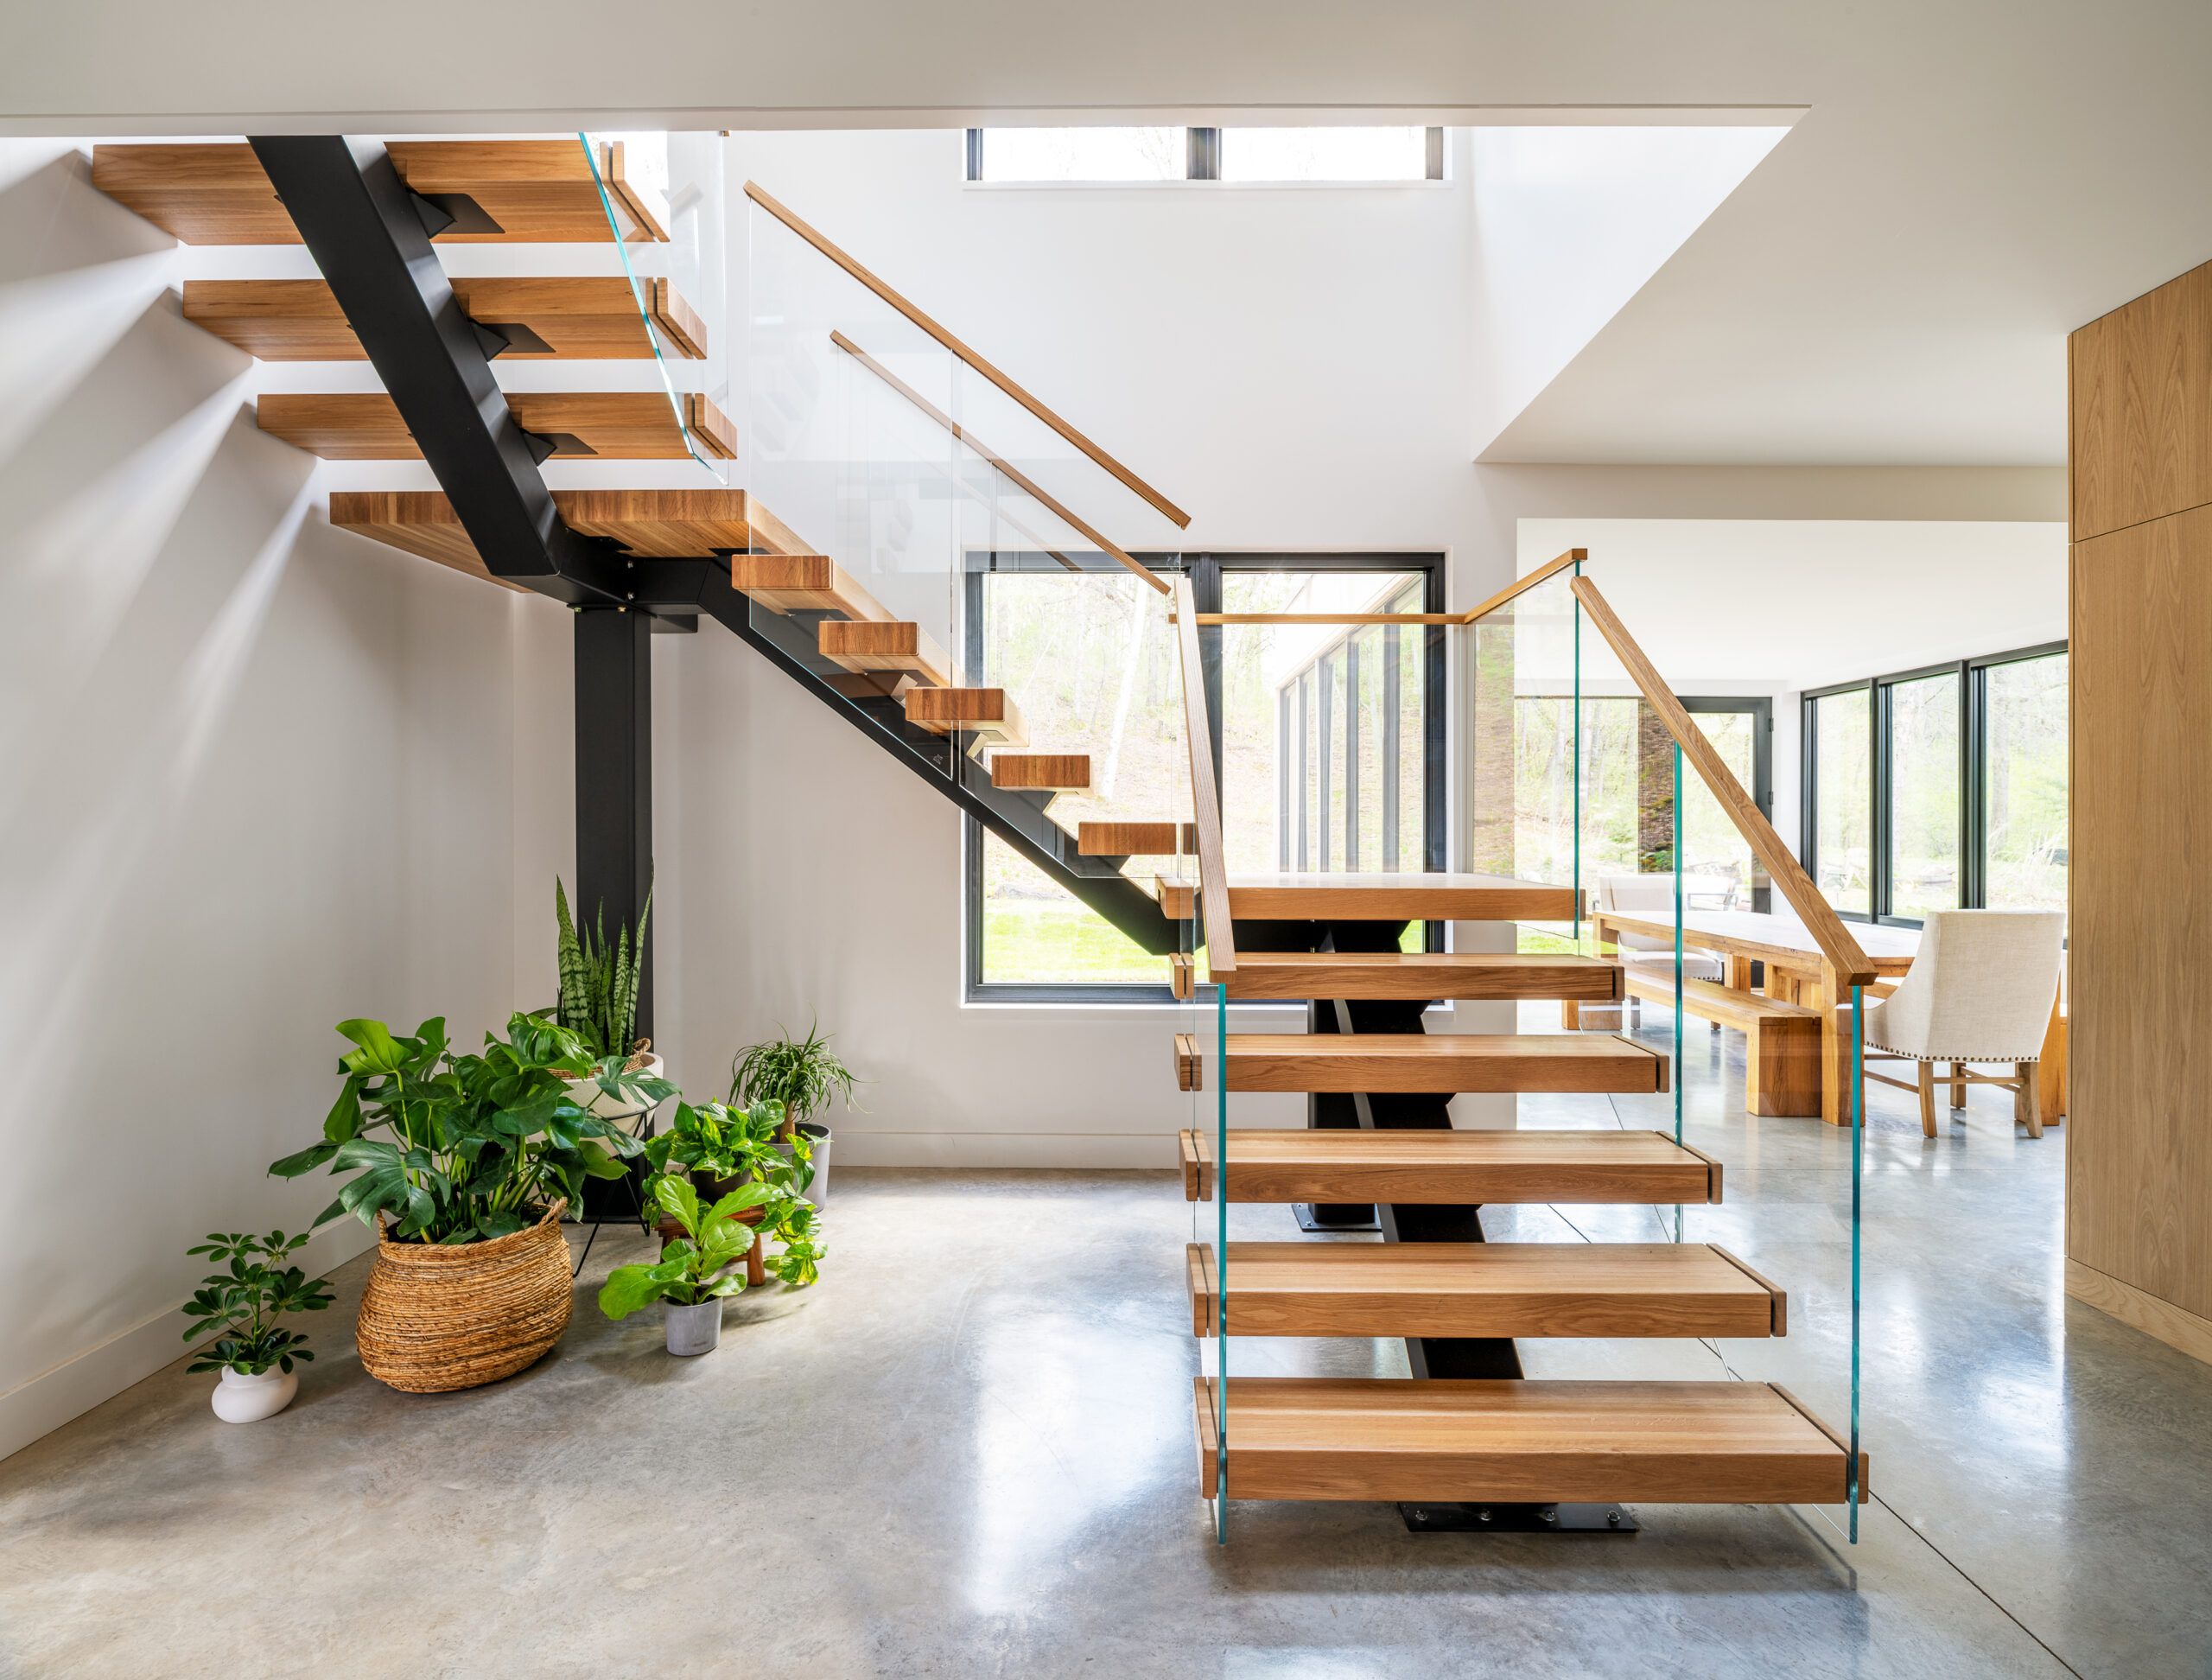 6 Unique Stair Railing Design Ideas to Hold On To - Viewrail